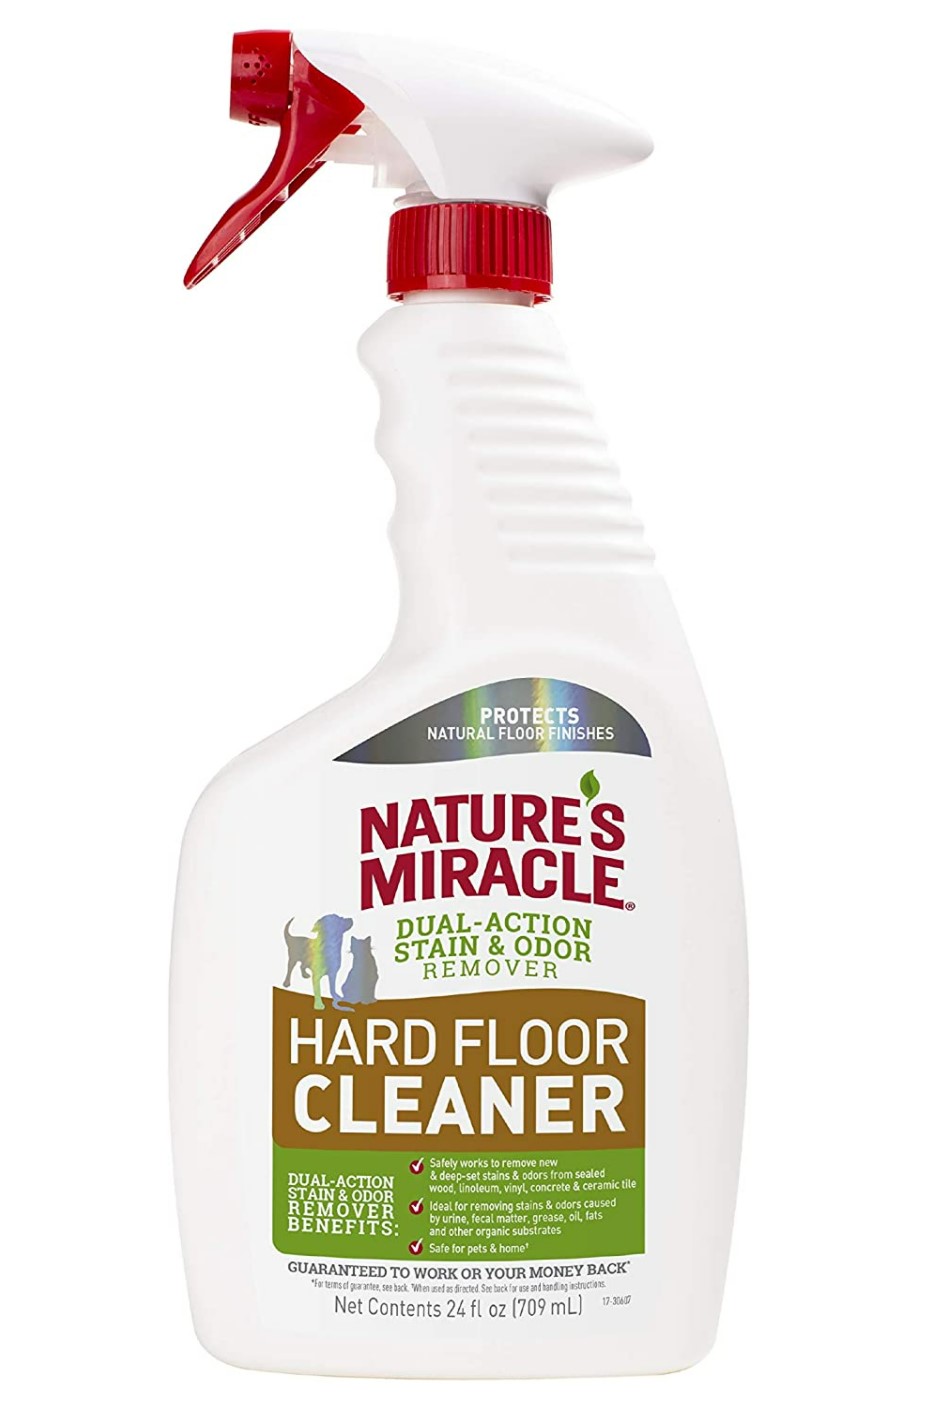 Nature’s Miracle Hard Floor Cleaner